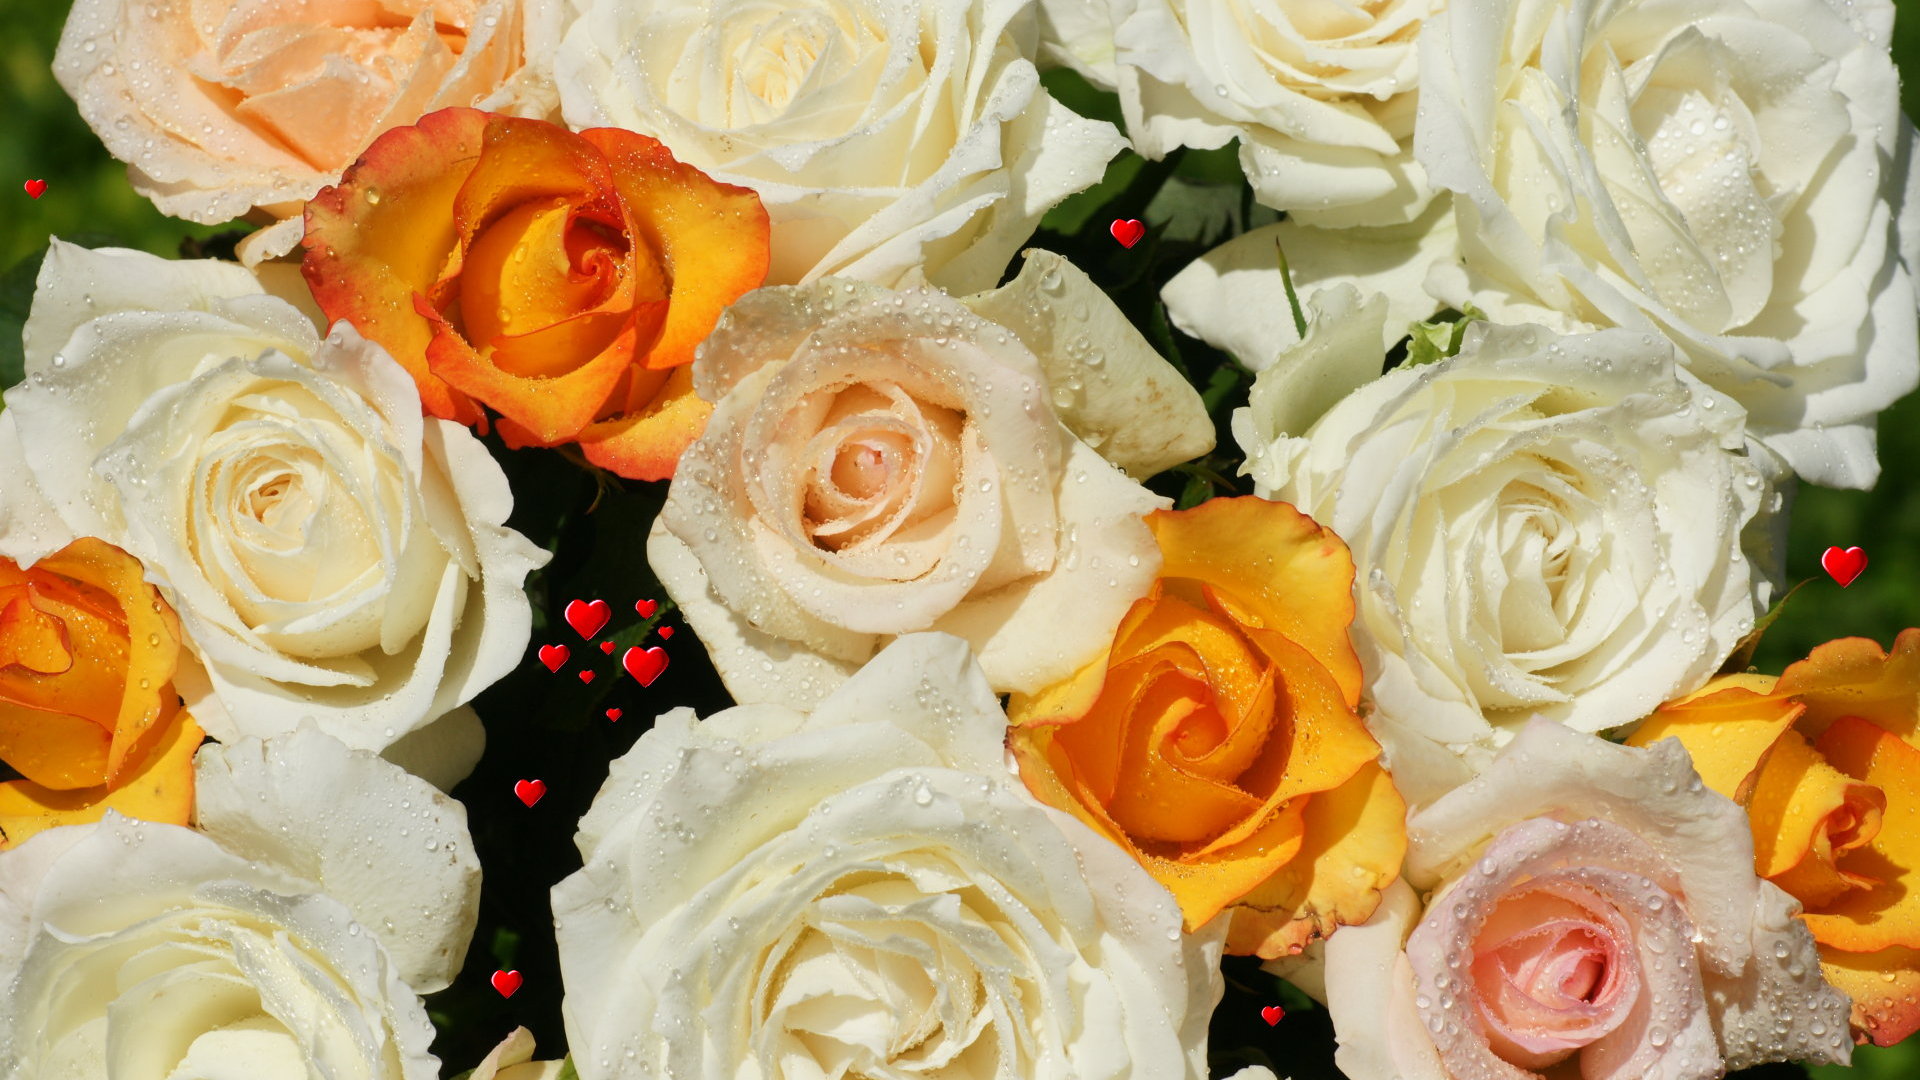 http://www.allabouthappylife.com/wallpaper/widescreen/roses/beautiful-color-roses-dsc06168-ws.jpg